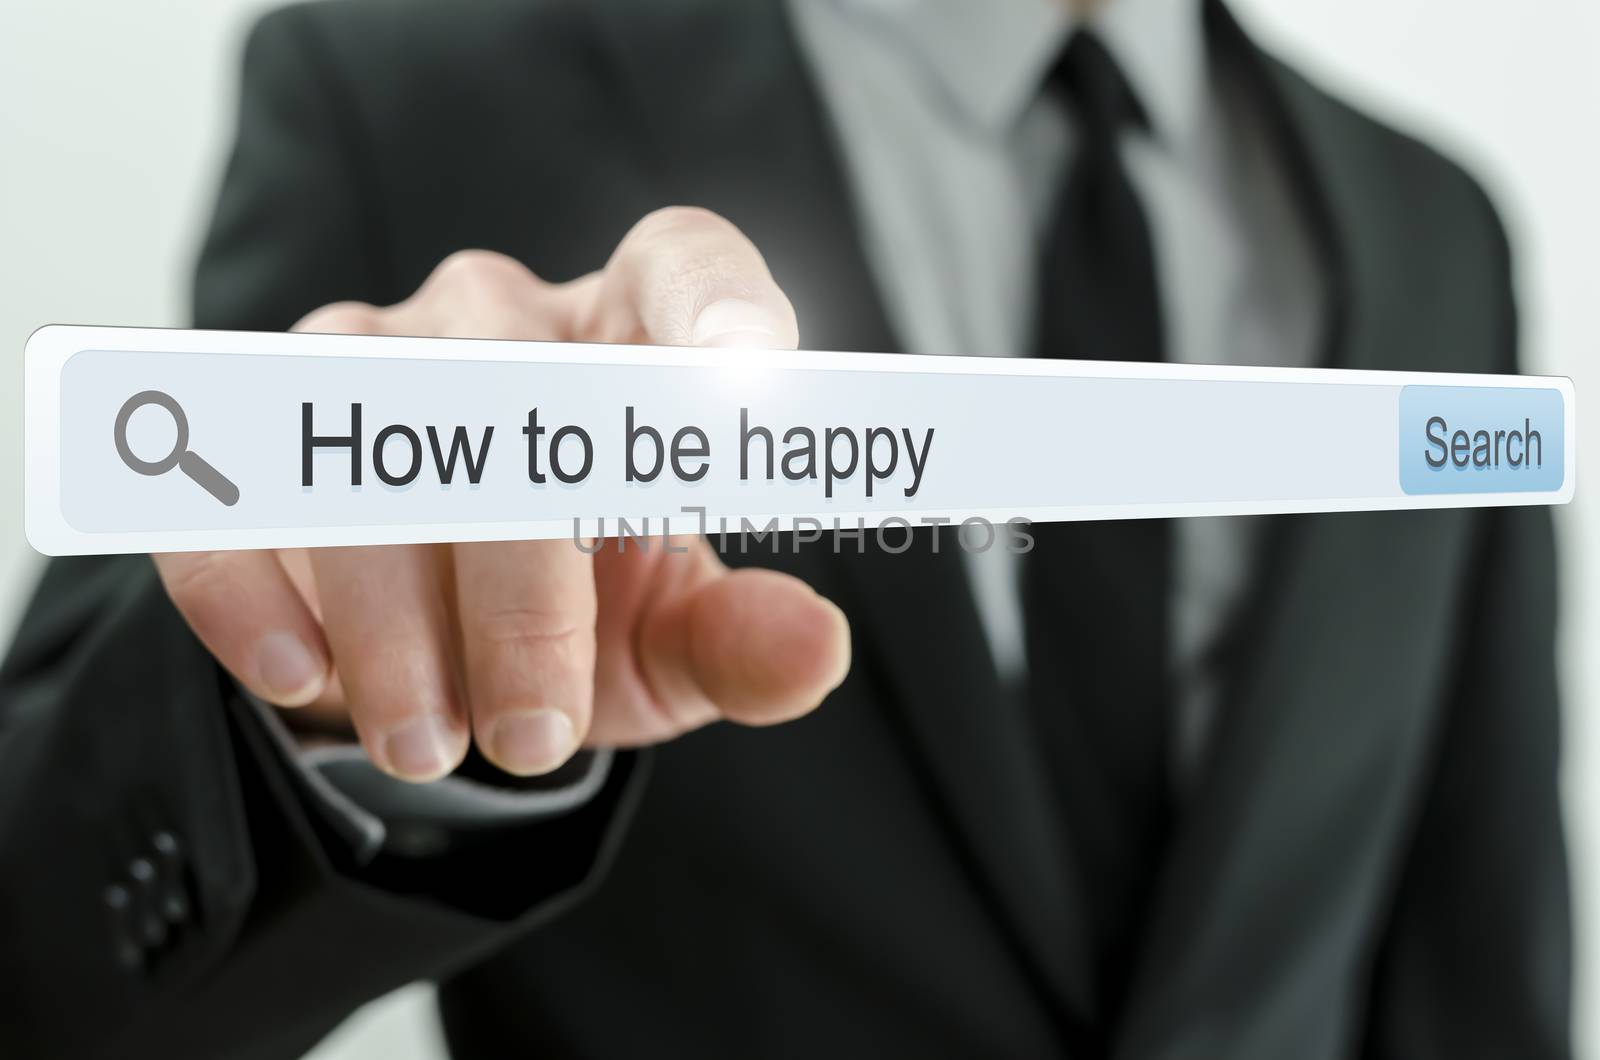 How to be happy written in search bar on virtual screen.